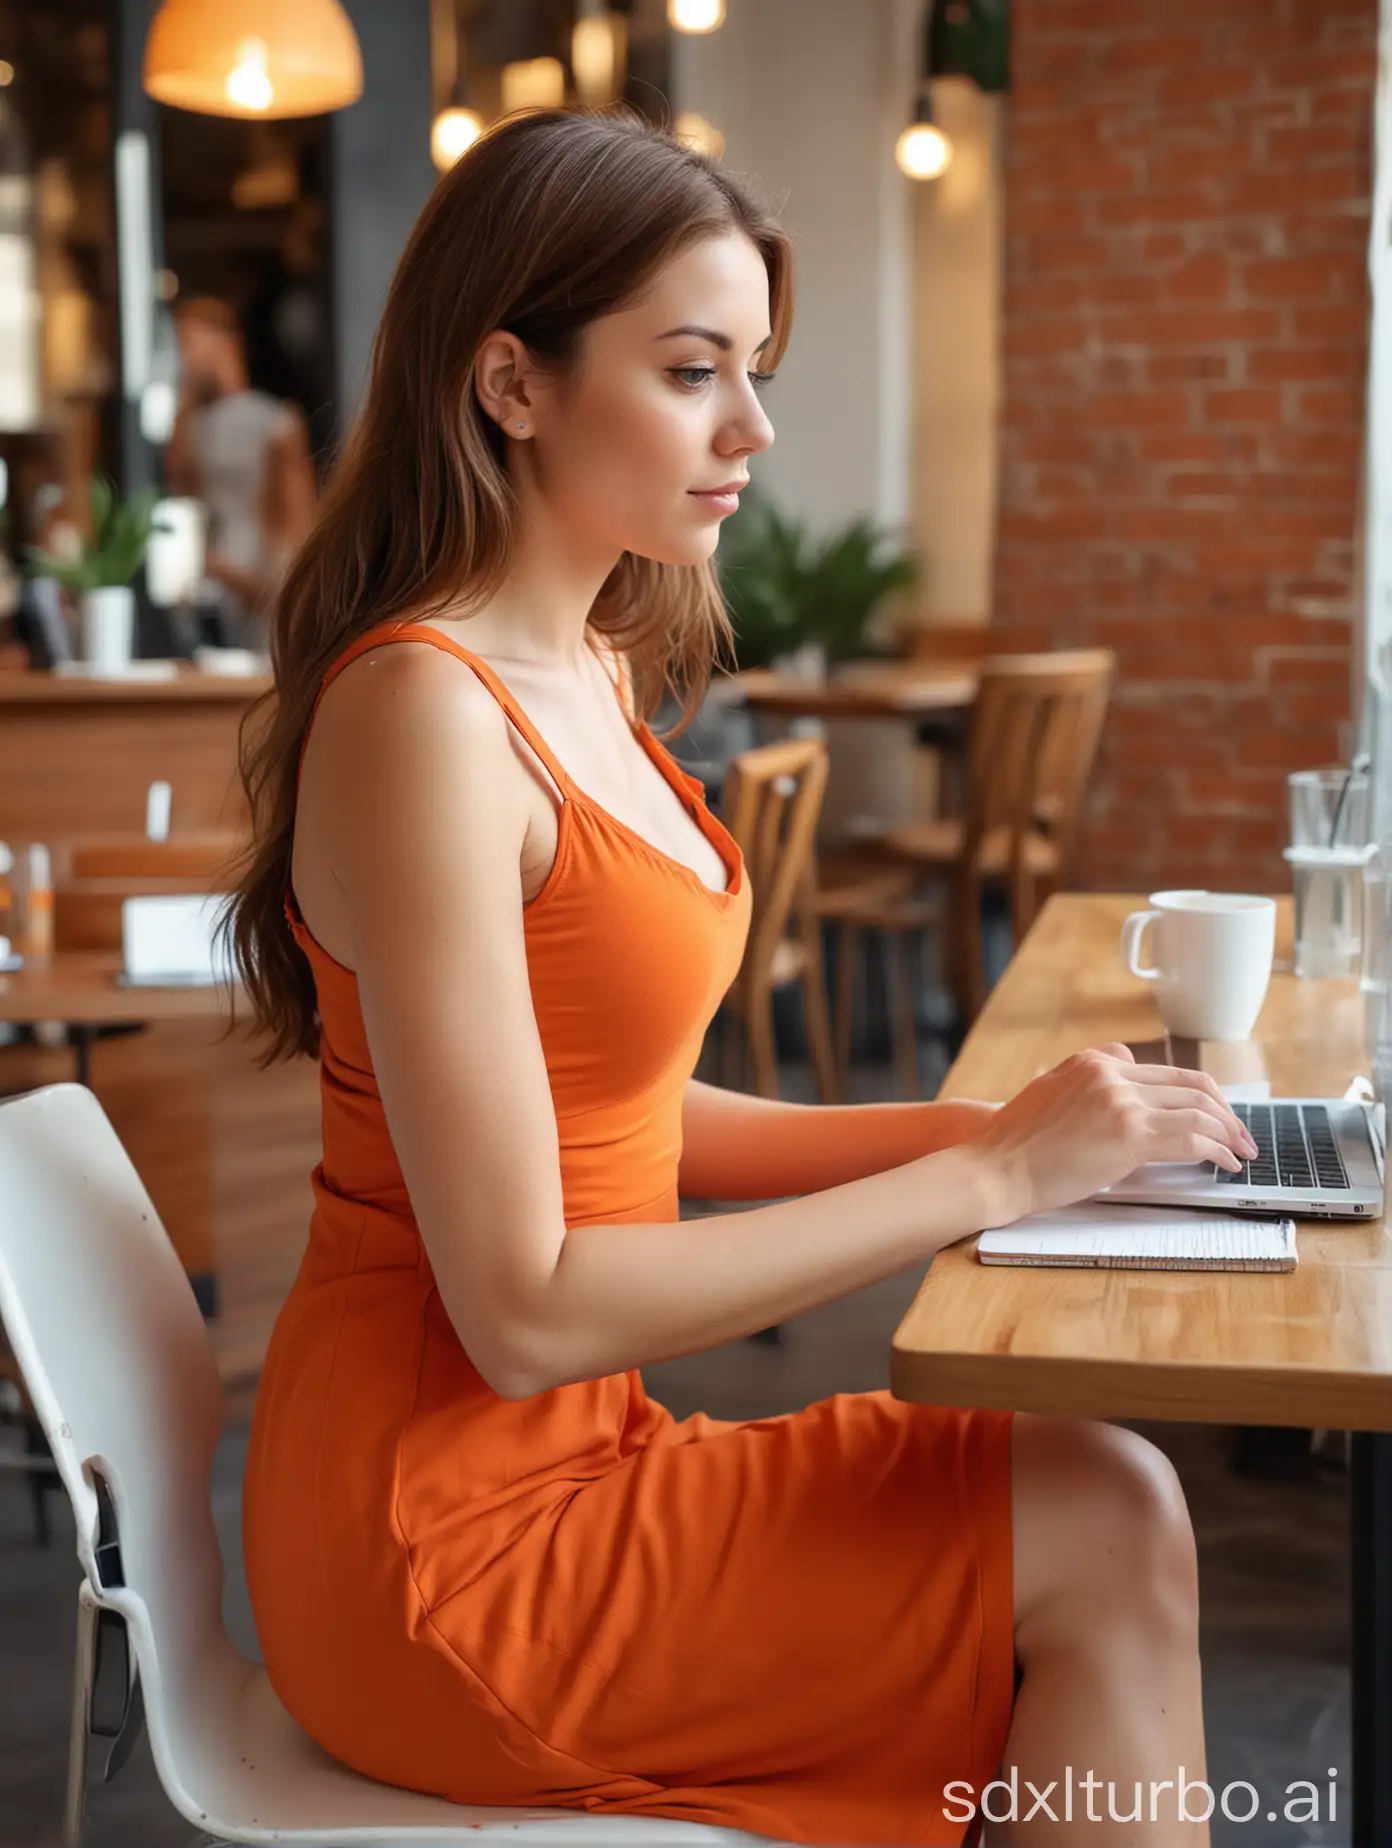 woman, medium brown hair, slim body, small breast, wearing orange long sleeveless sundress, wearing white sneakers, sitting at a table, working on a MacBook, in a café, background blur, side view